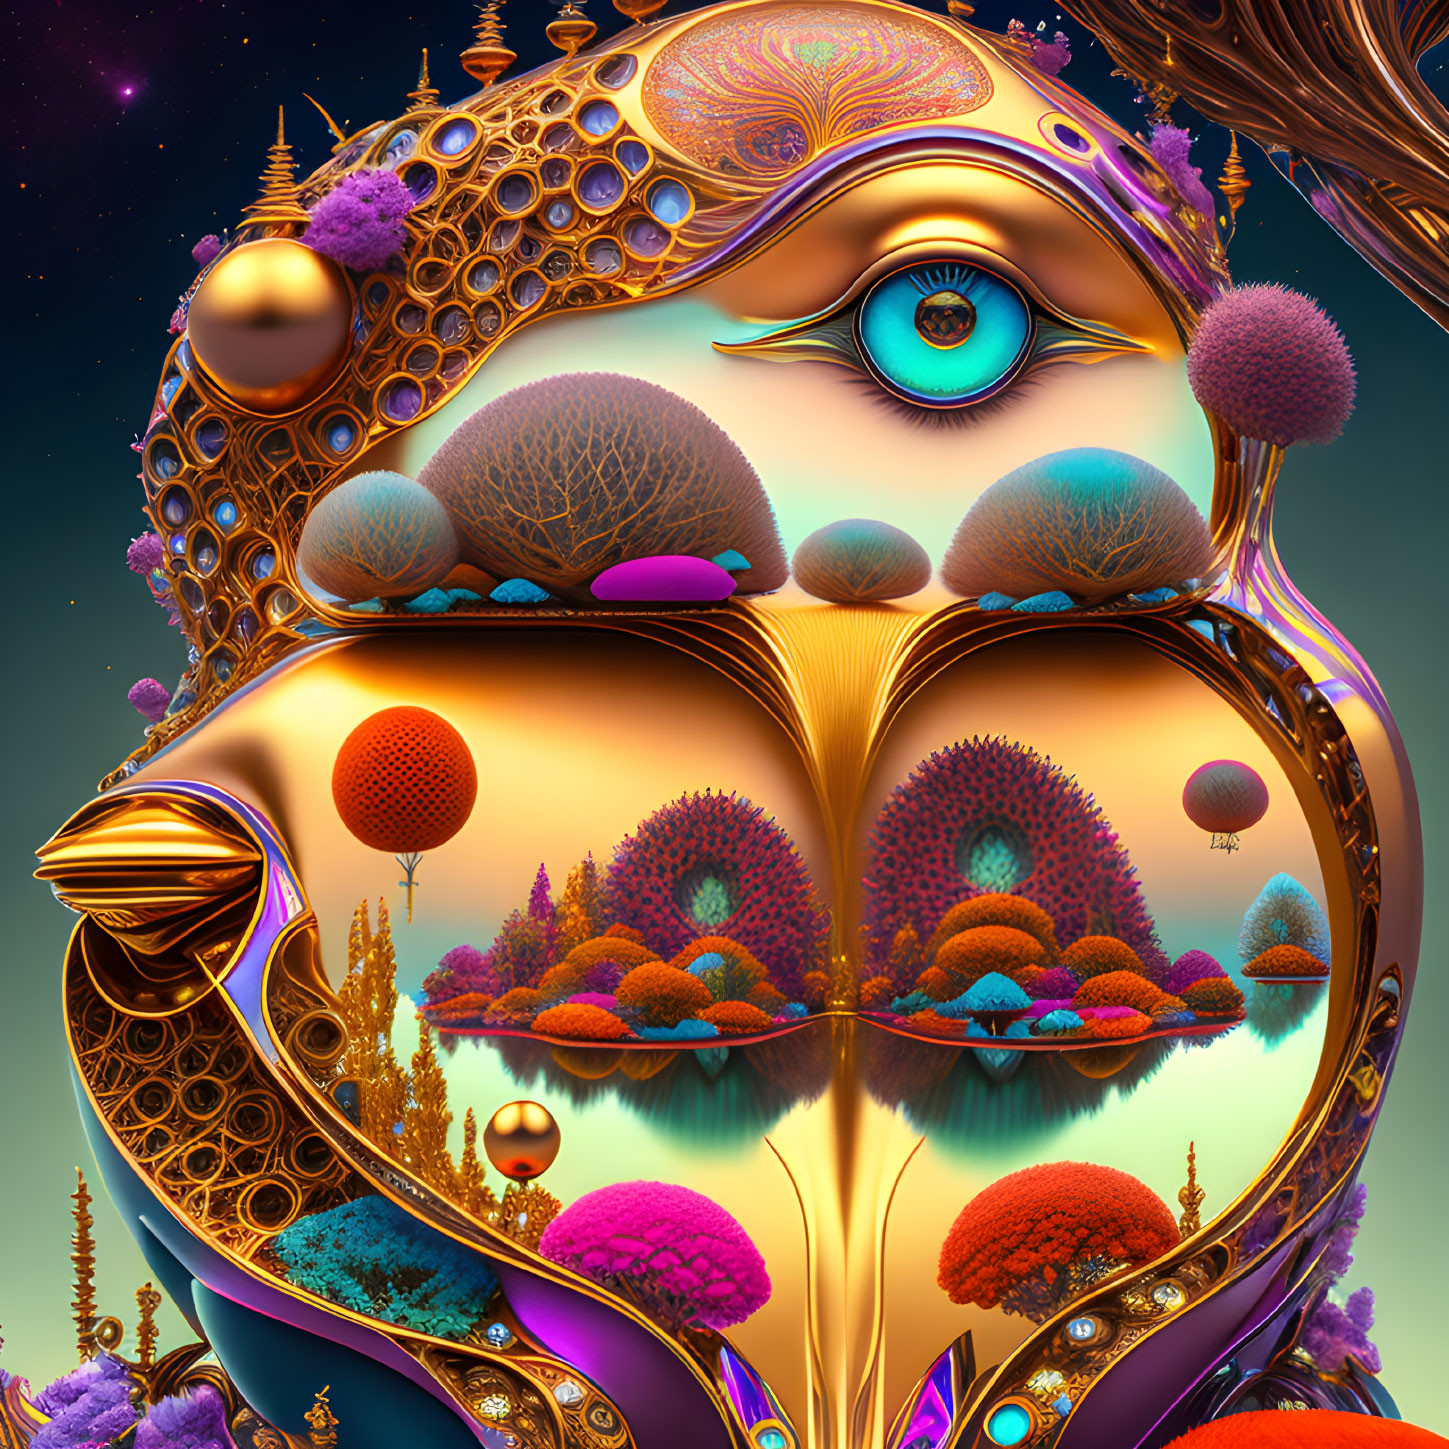 Abstract surreal digital art with vivid colors and central eye in symmetrical composition